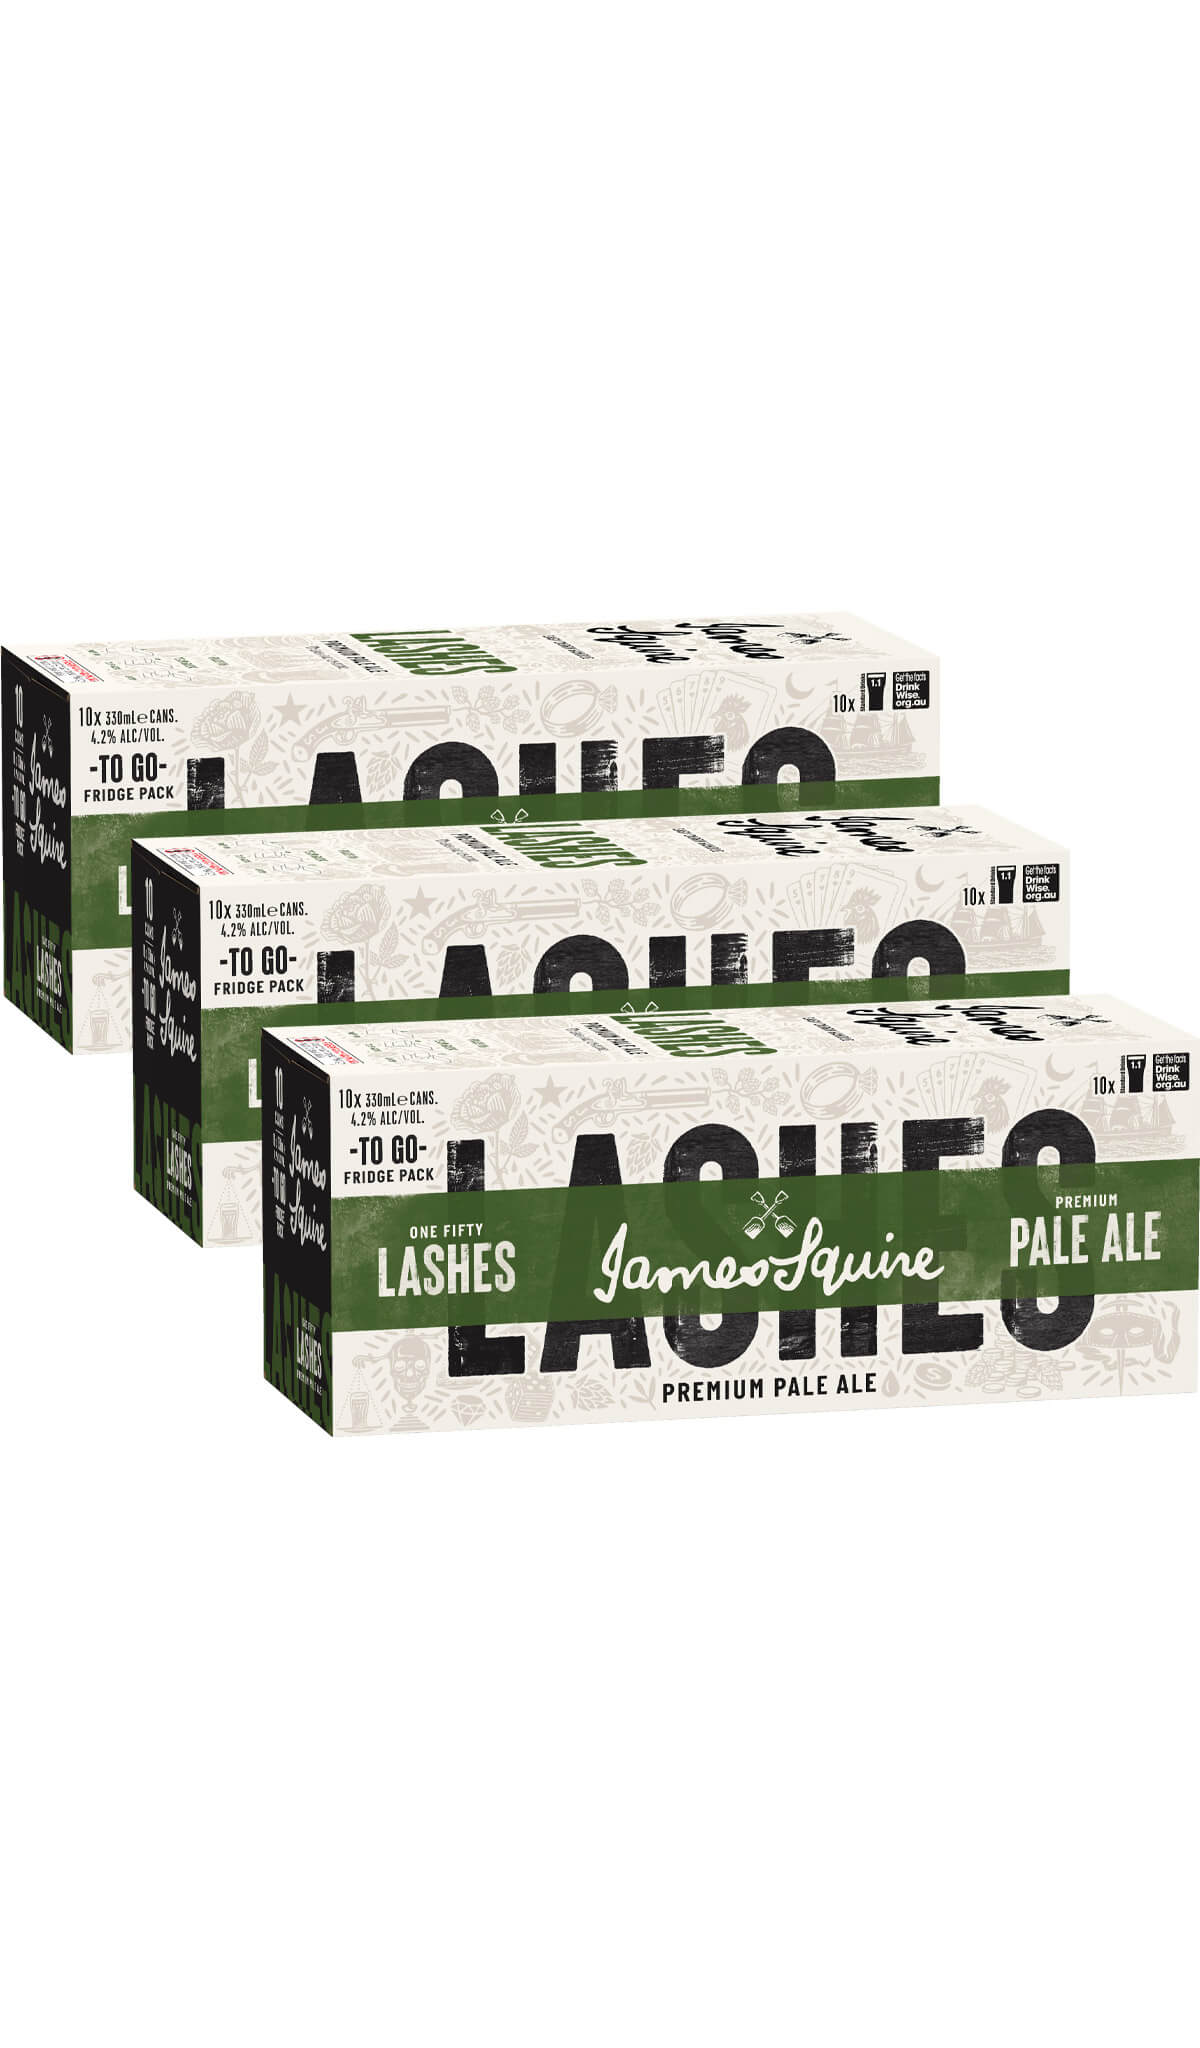 Find out more, explore the range and buy 3x 10-pack James Squire One Fifty Lashes Pale Ale 330mL available online at Wine Sellers Direct - Australia's independent liquor specialists.